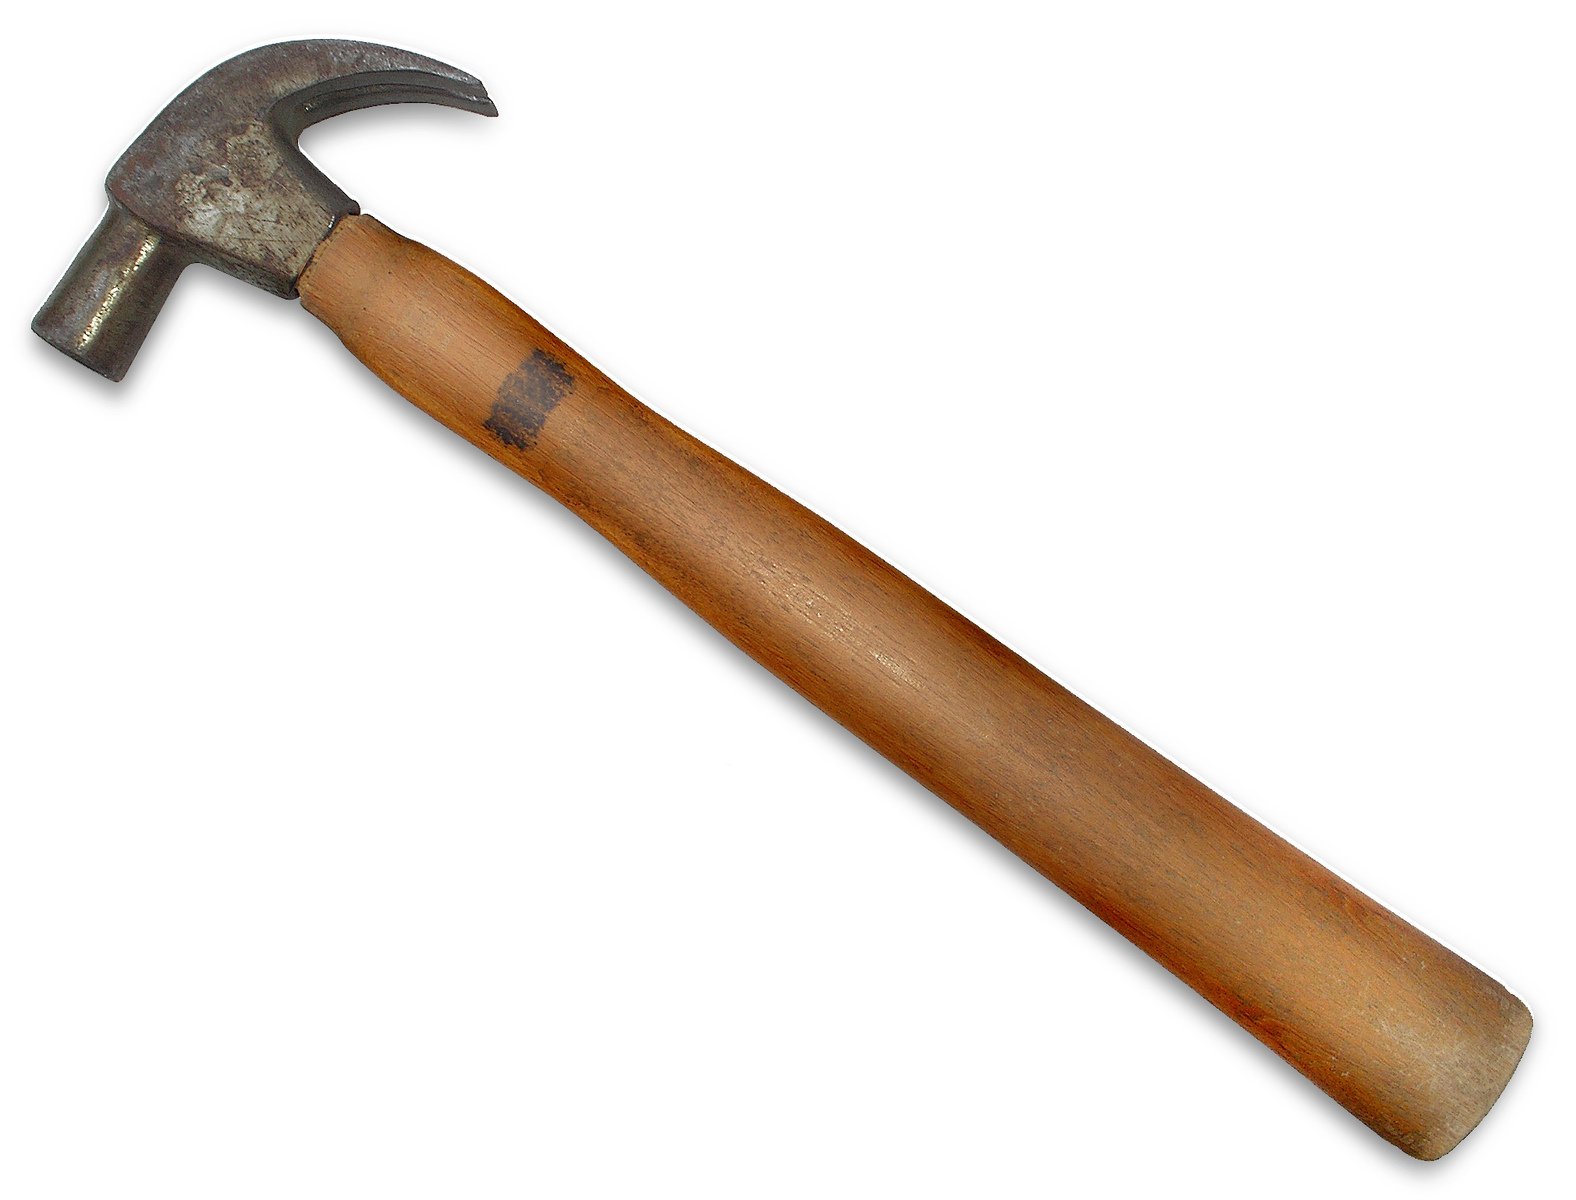 an old hammer sits upright on a white background